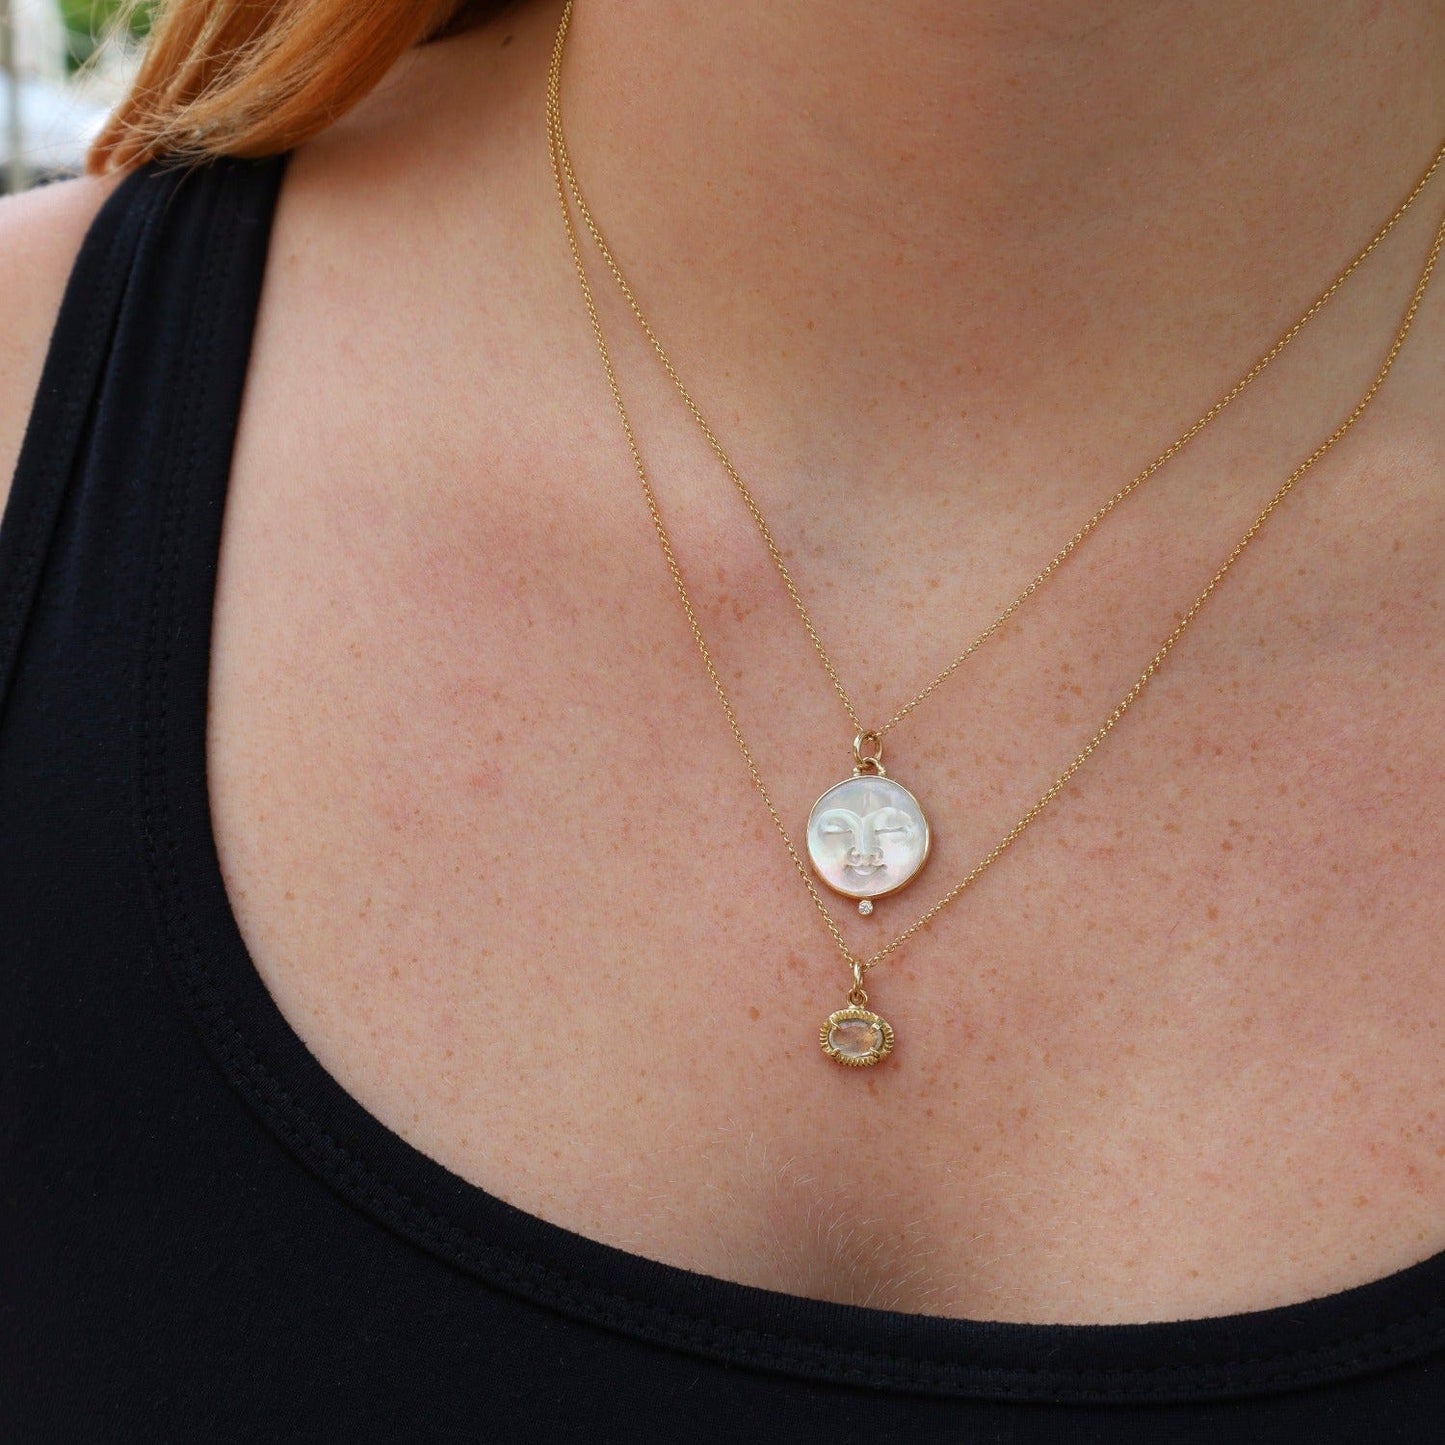 NKL-14K Gold Lunarian Necklace with Mother of Pearl & Diamond